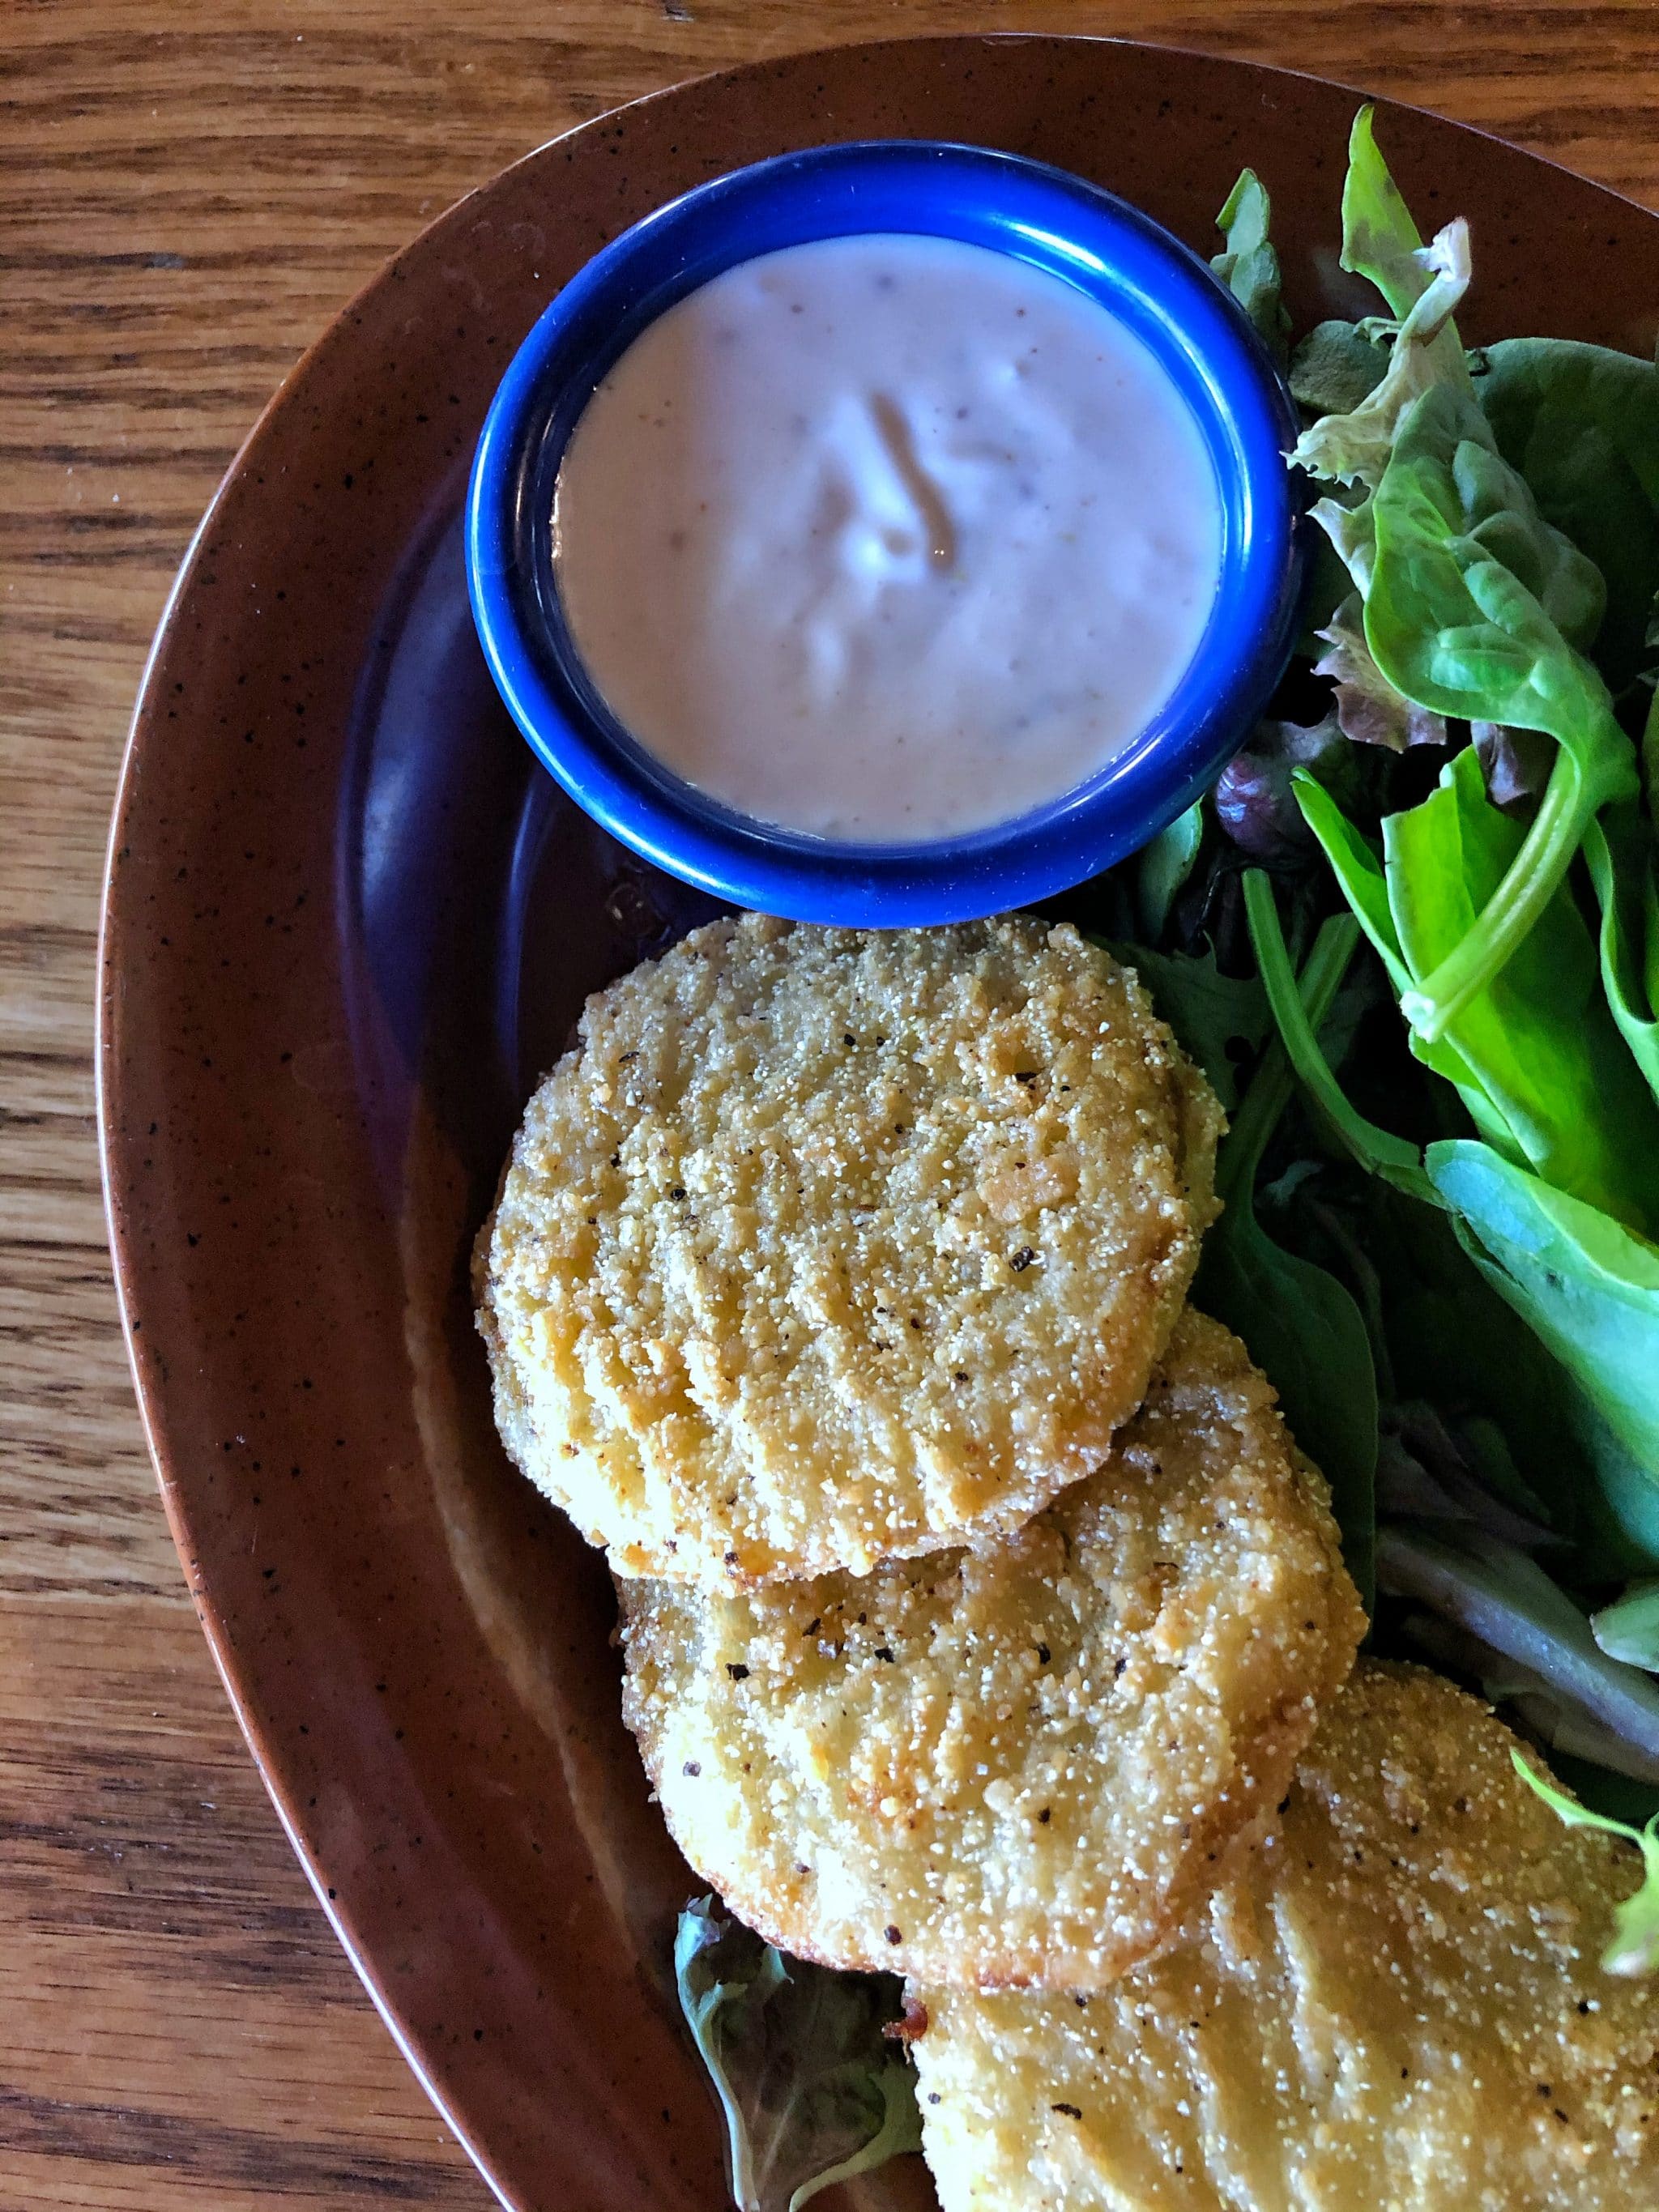 Vegan Fried Green Tomatoes at Crocket’s Tavern in Disney’s Fort Wilderness Resort and Campground at Walt Disney World